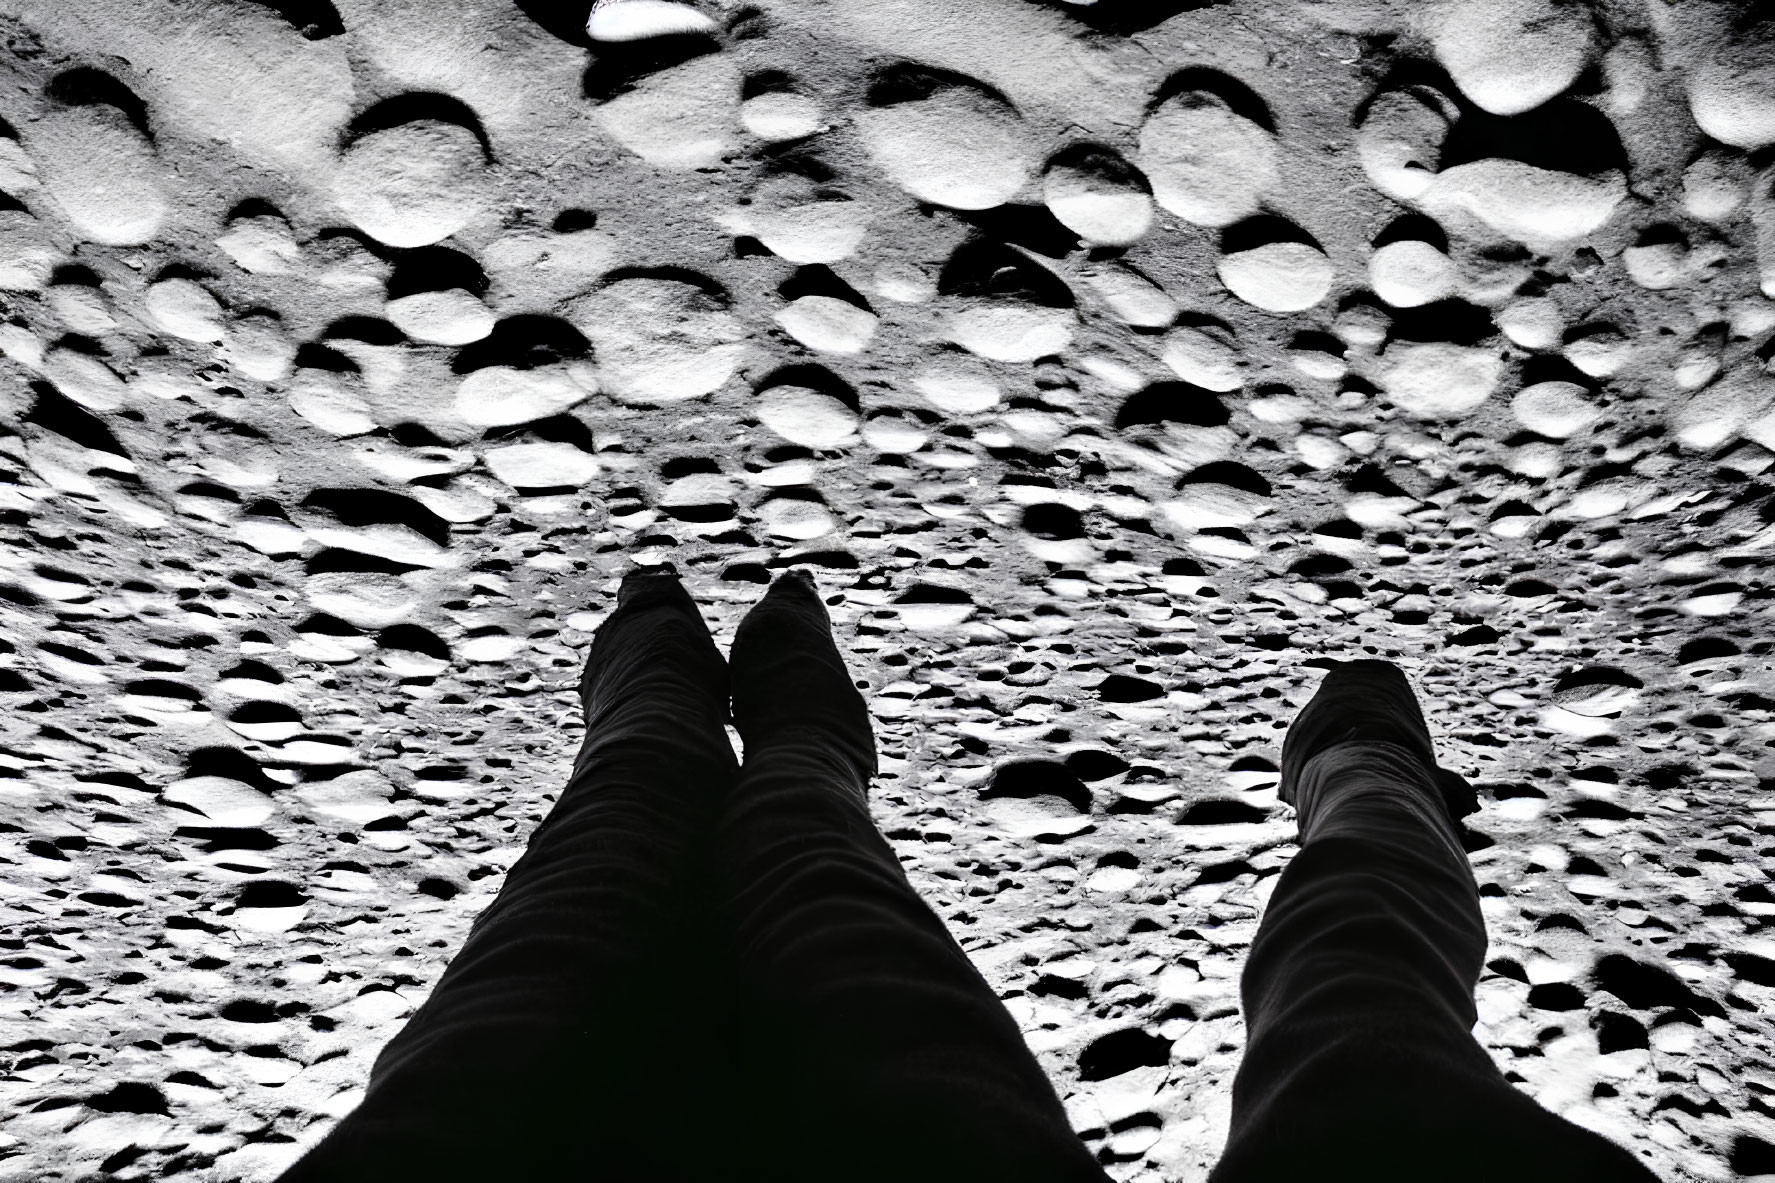 Monochrome image of legs on pebbled surface with dramatic lighting